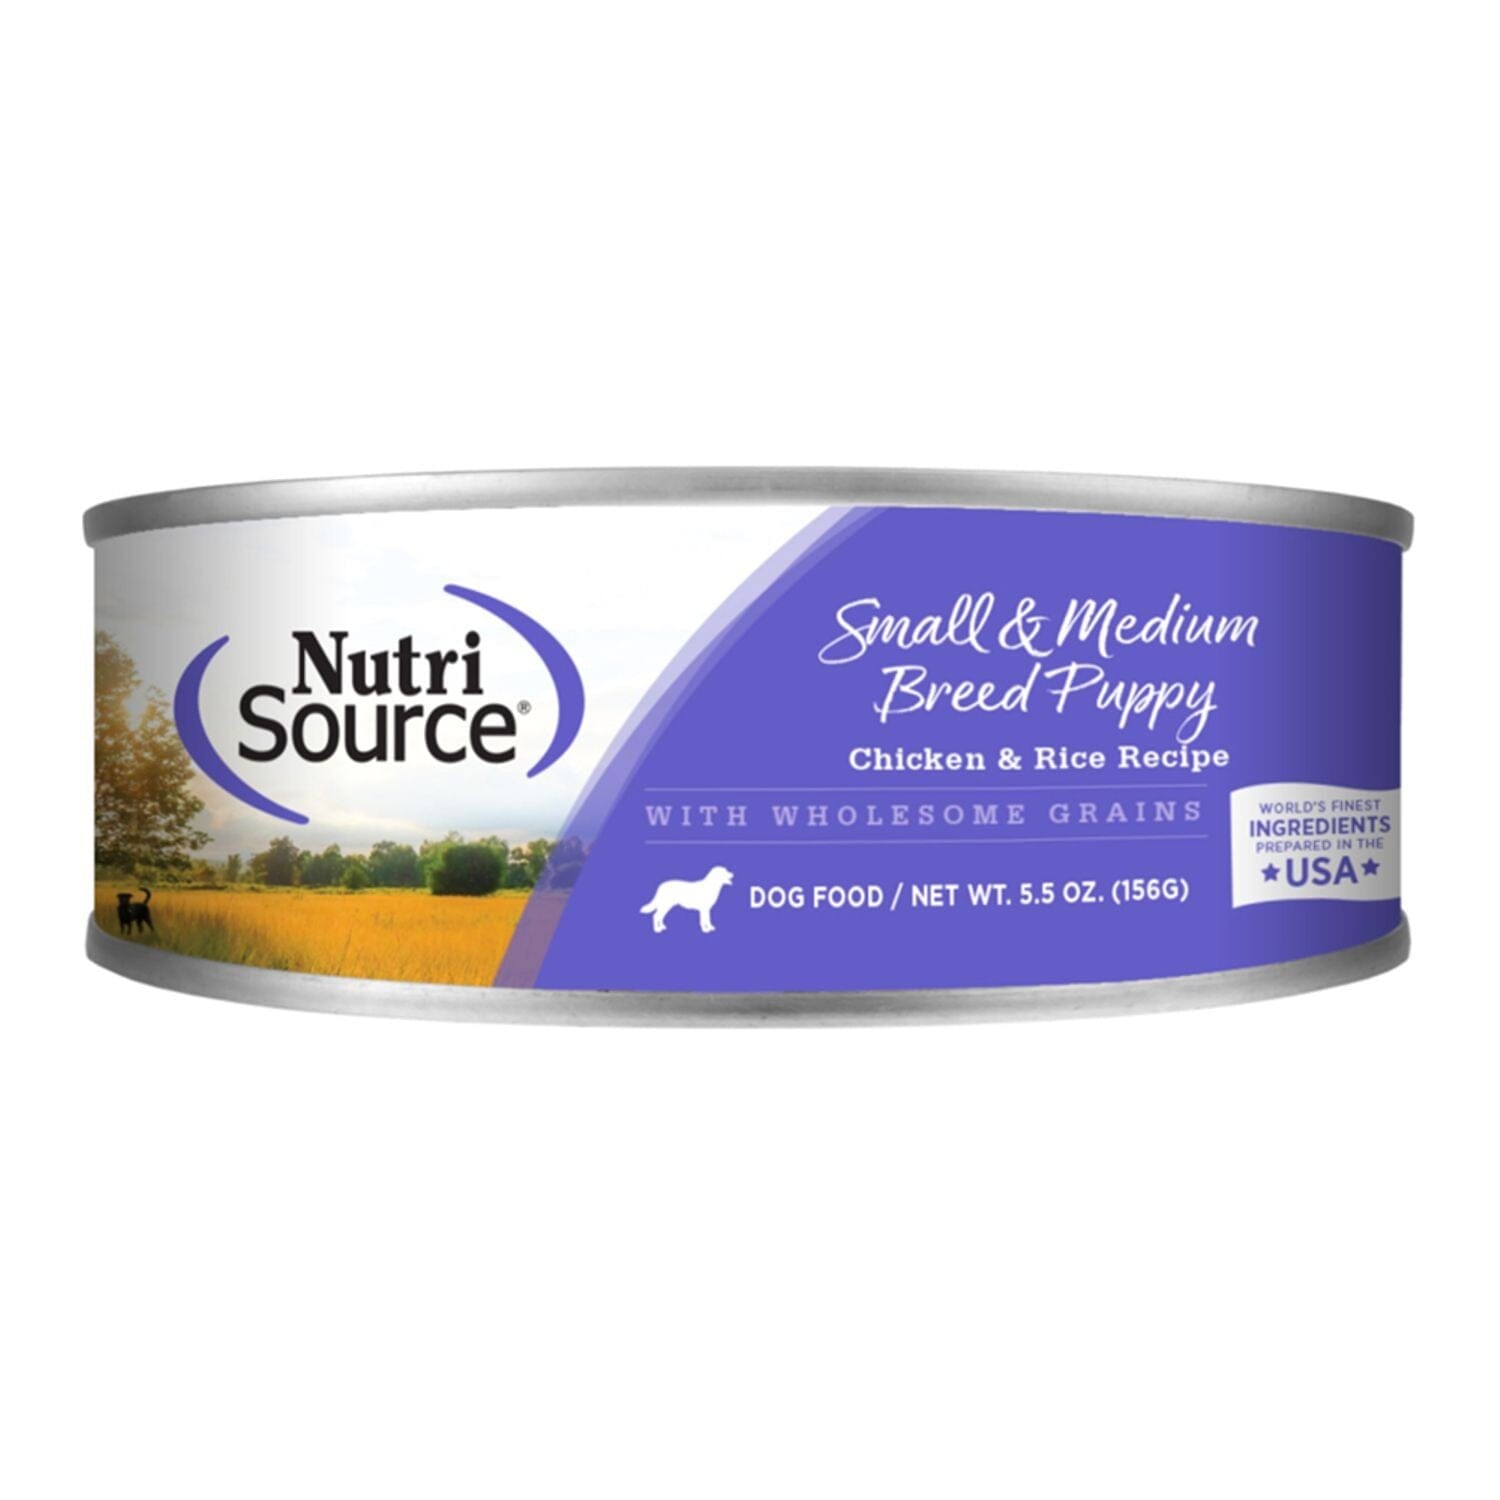 Nutrisource Puppy Small & Medium Breed Canned Dog Food Chicken & Rice Recipe - 5.5 oz - Case of 12  